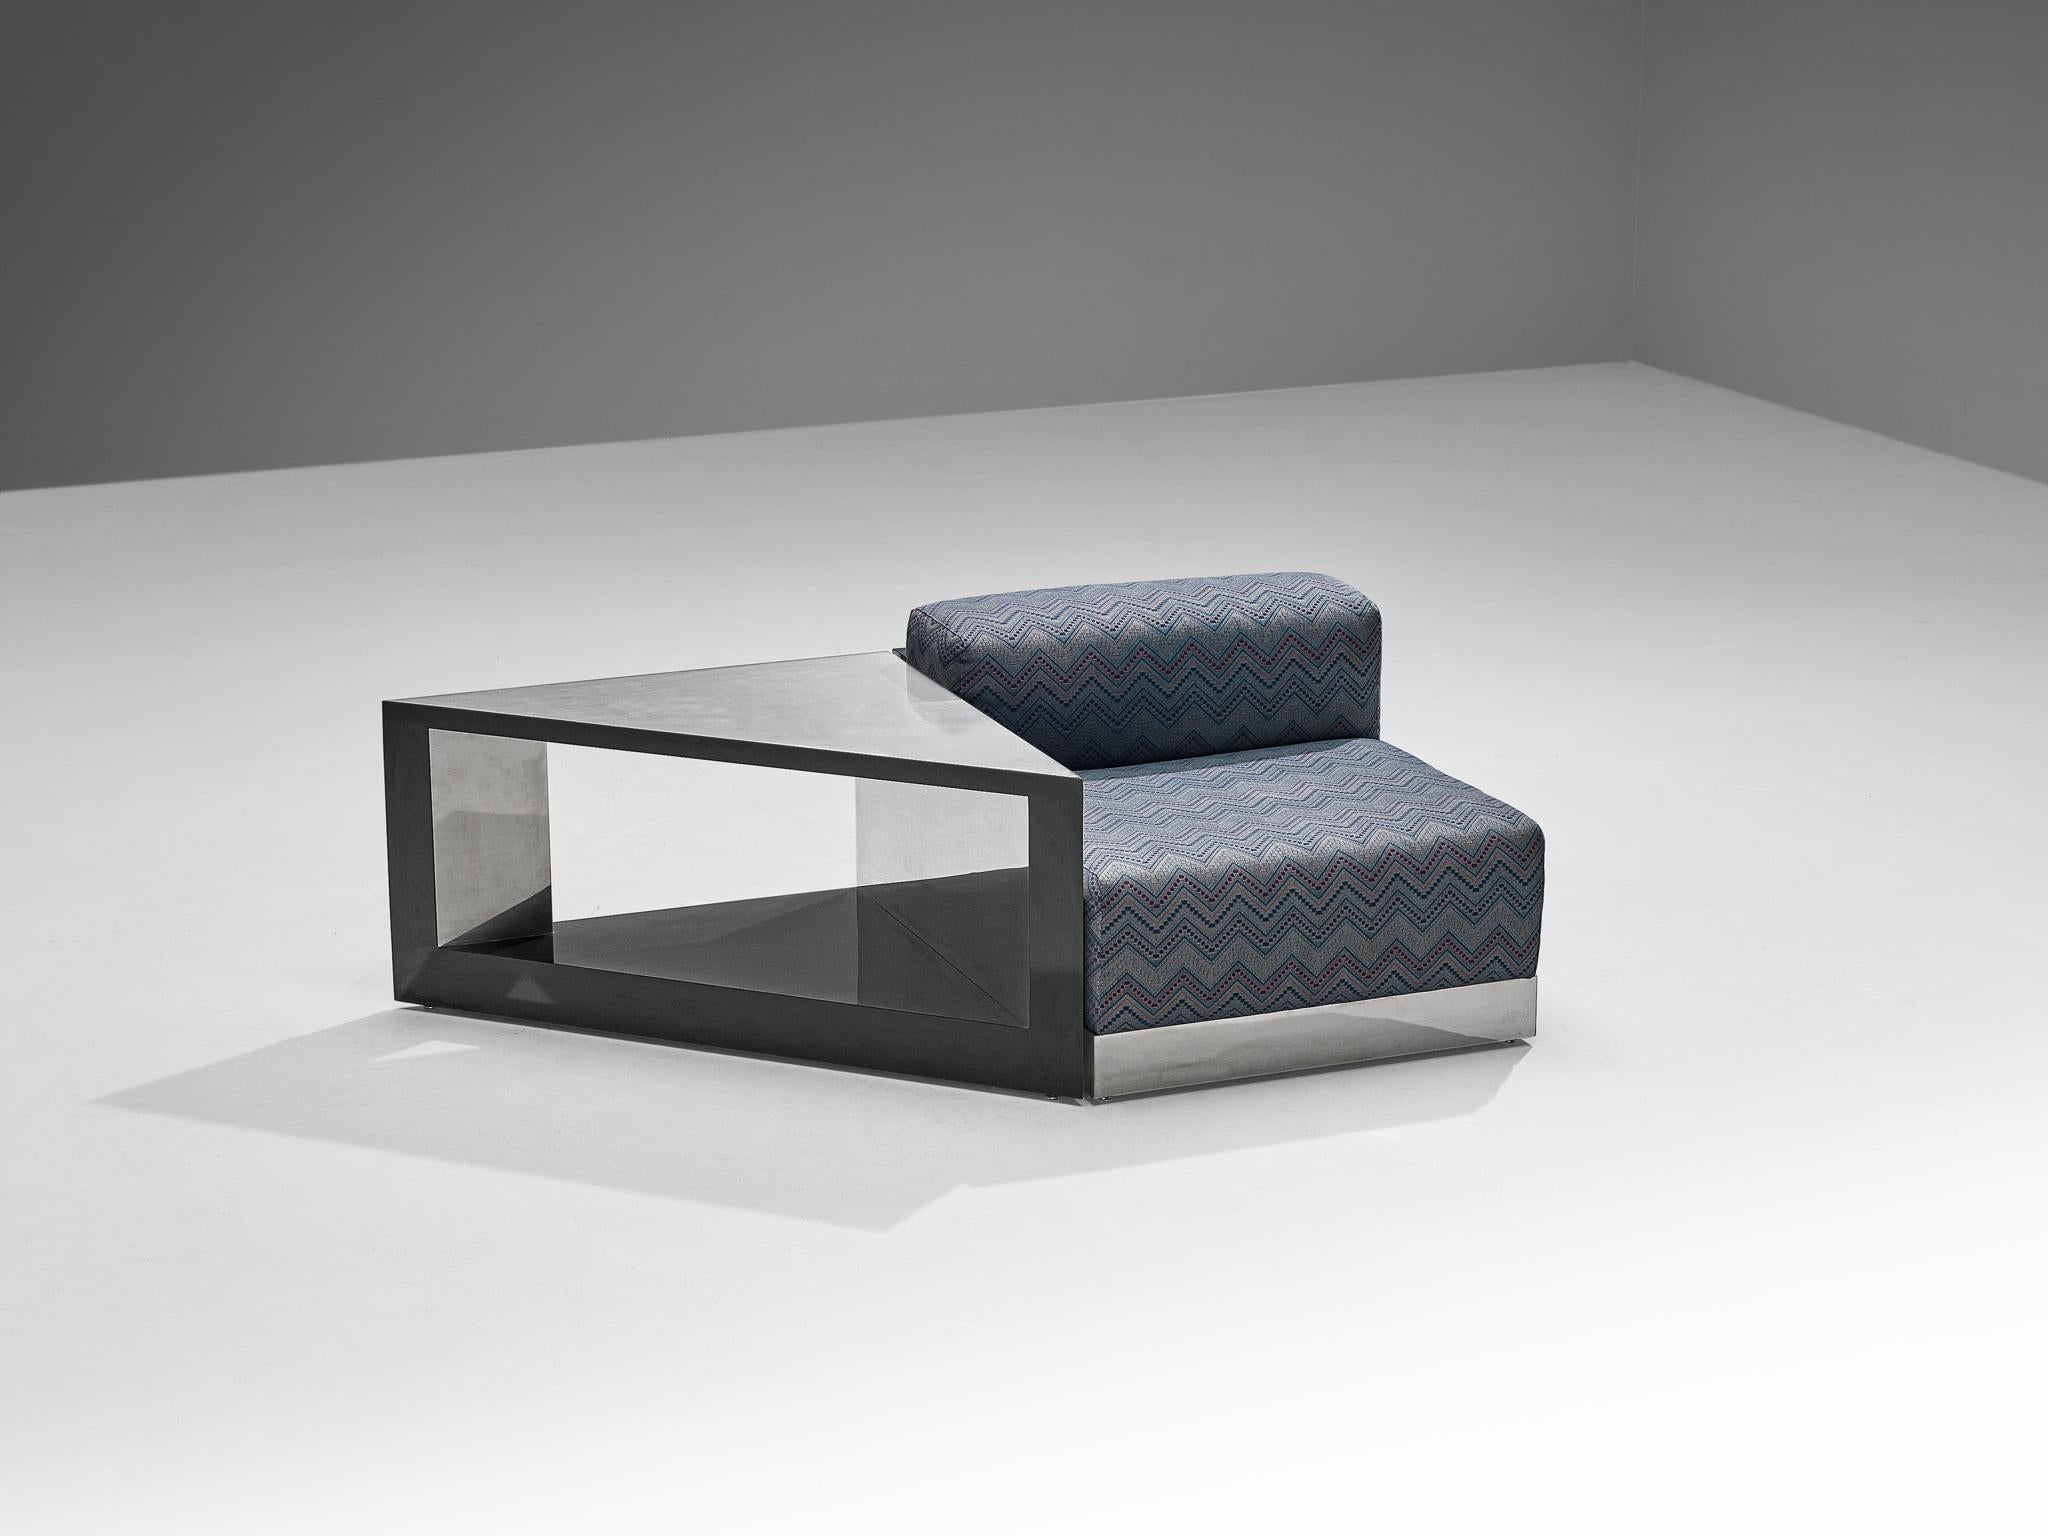 Sitting element and side table, laminated wood, stainless steel, fabric, Italy, 1980s

An Italian postmodern modular sitting element and side table. The design is bulky and shows typical features of the Space Age, such as the large, thick cushions